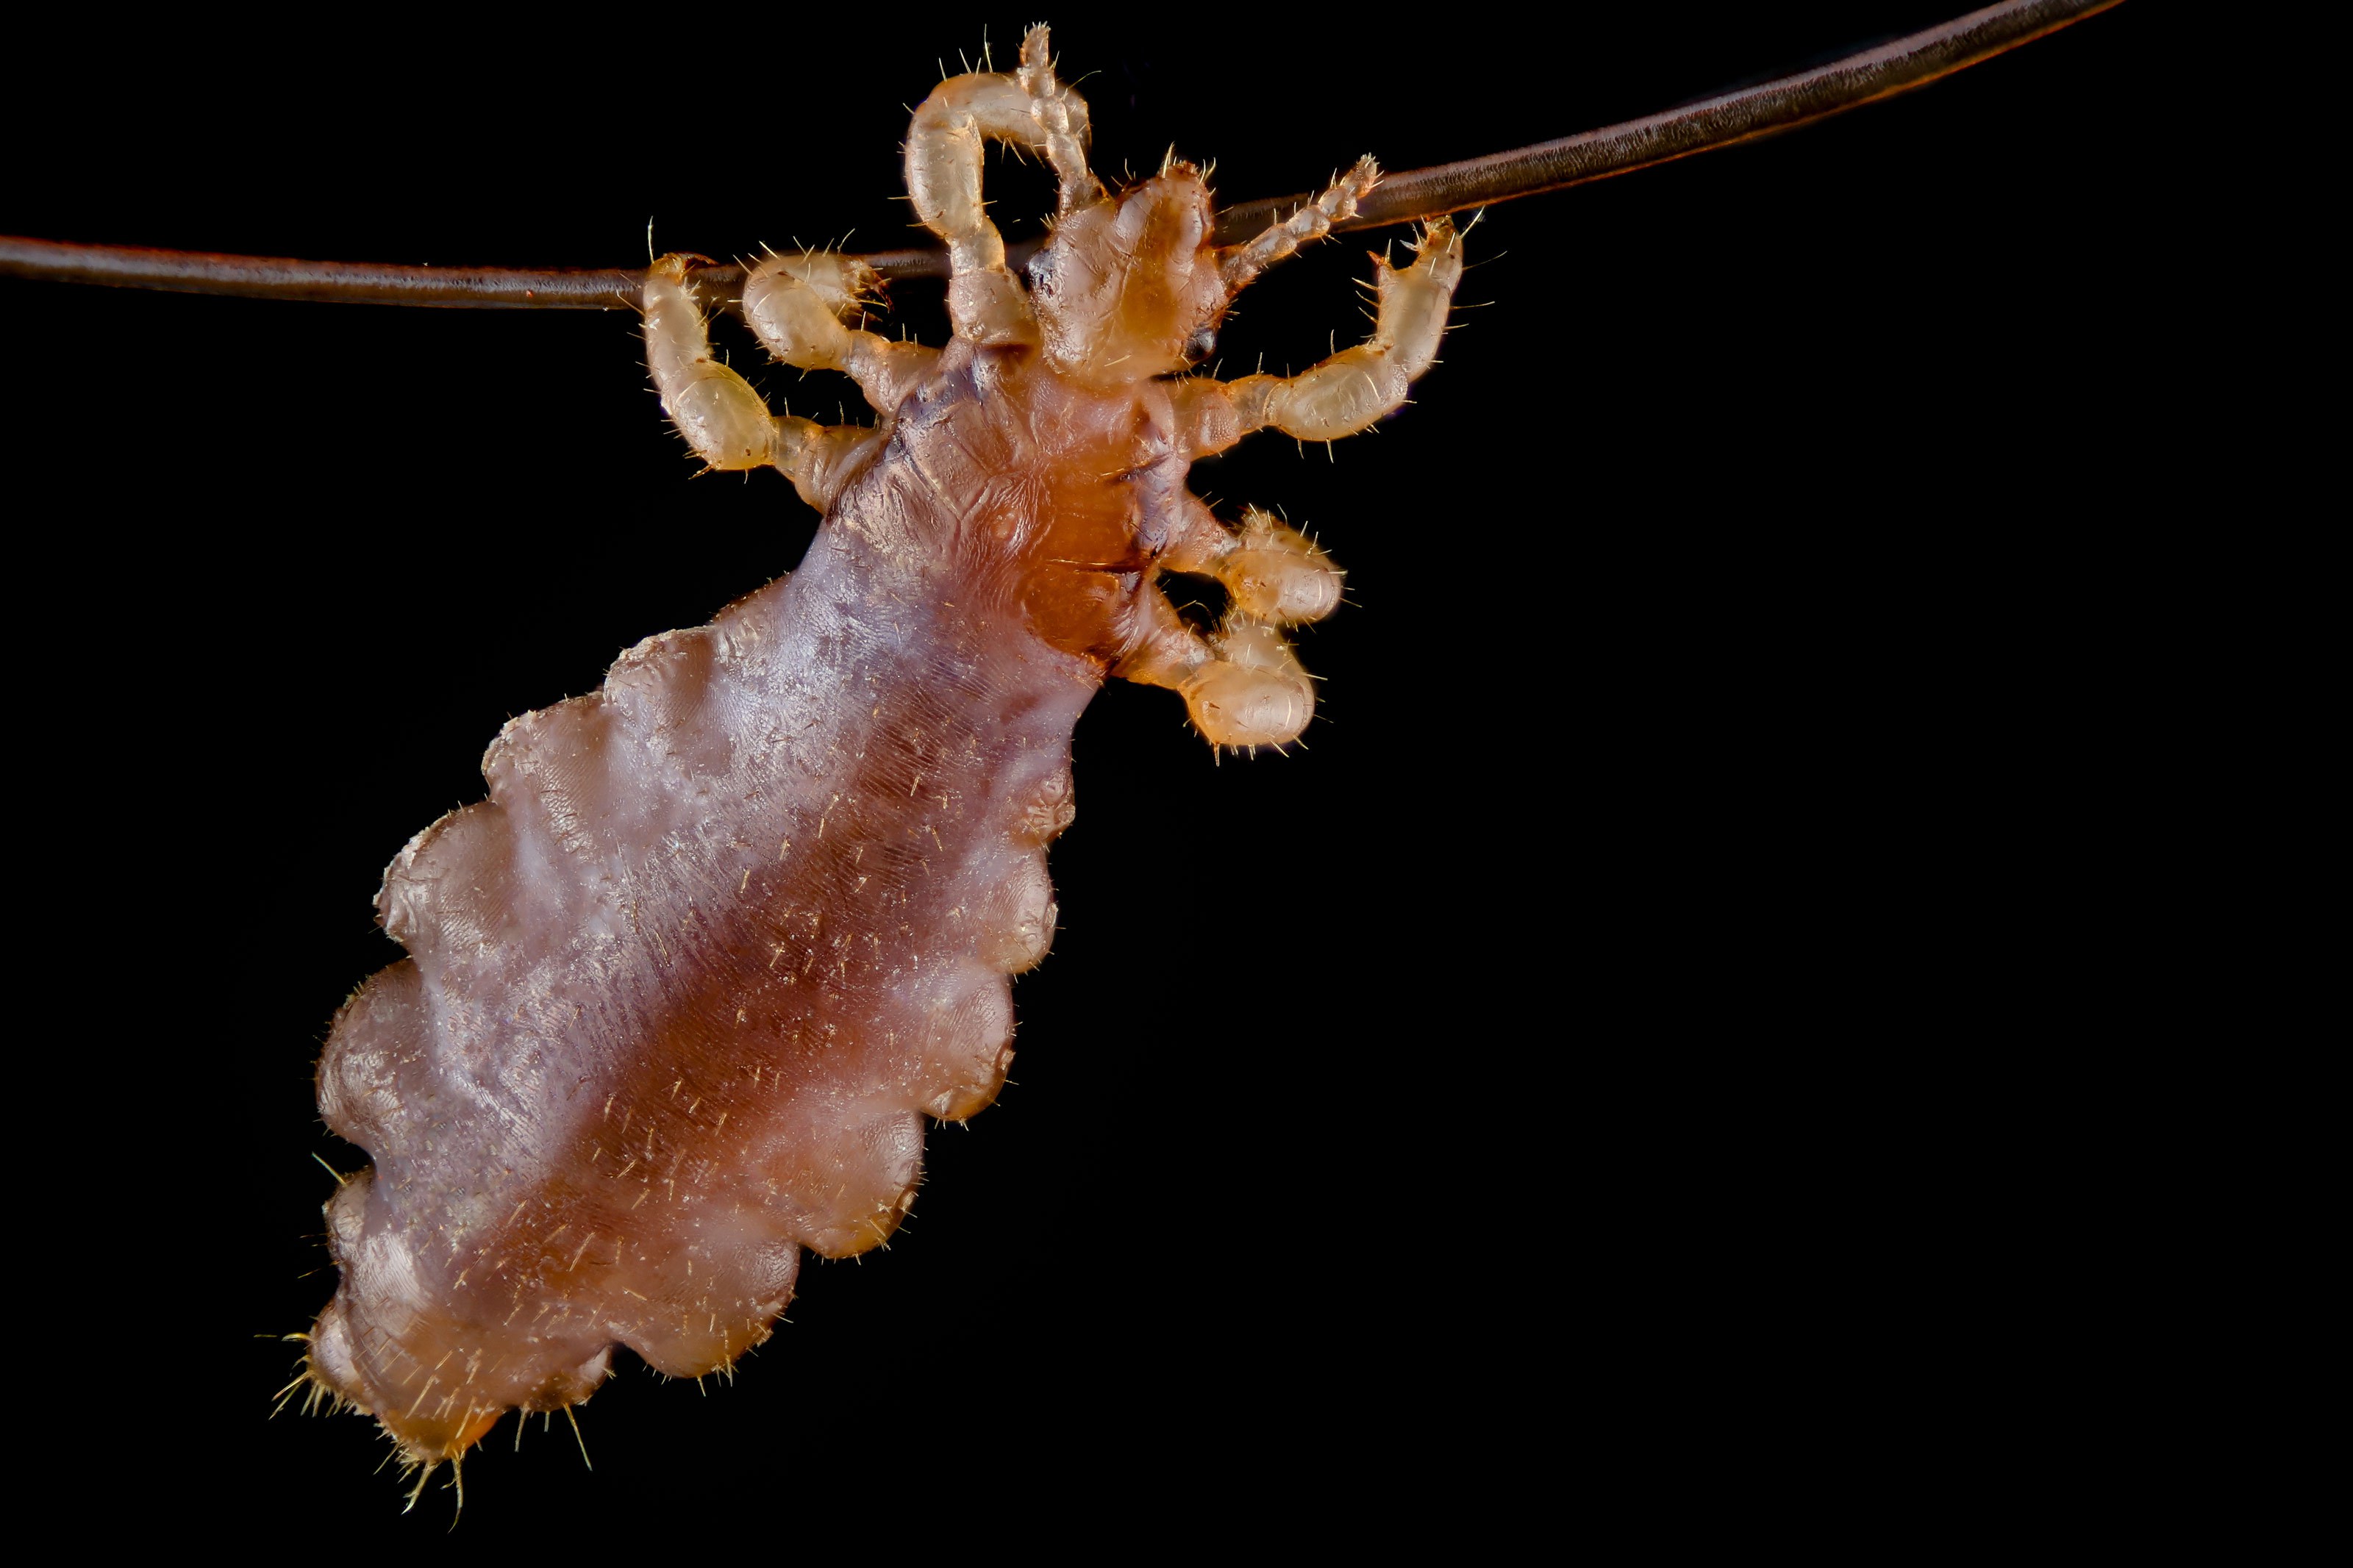 https://www.nikonsmallworld.com/images/photos/2019/Louse-hanging-from-a-hair.jpg